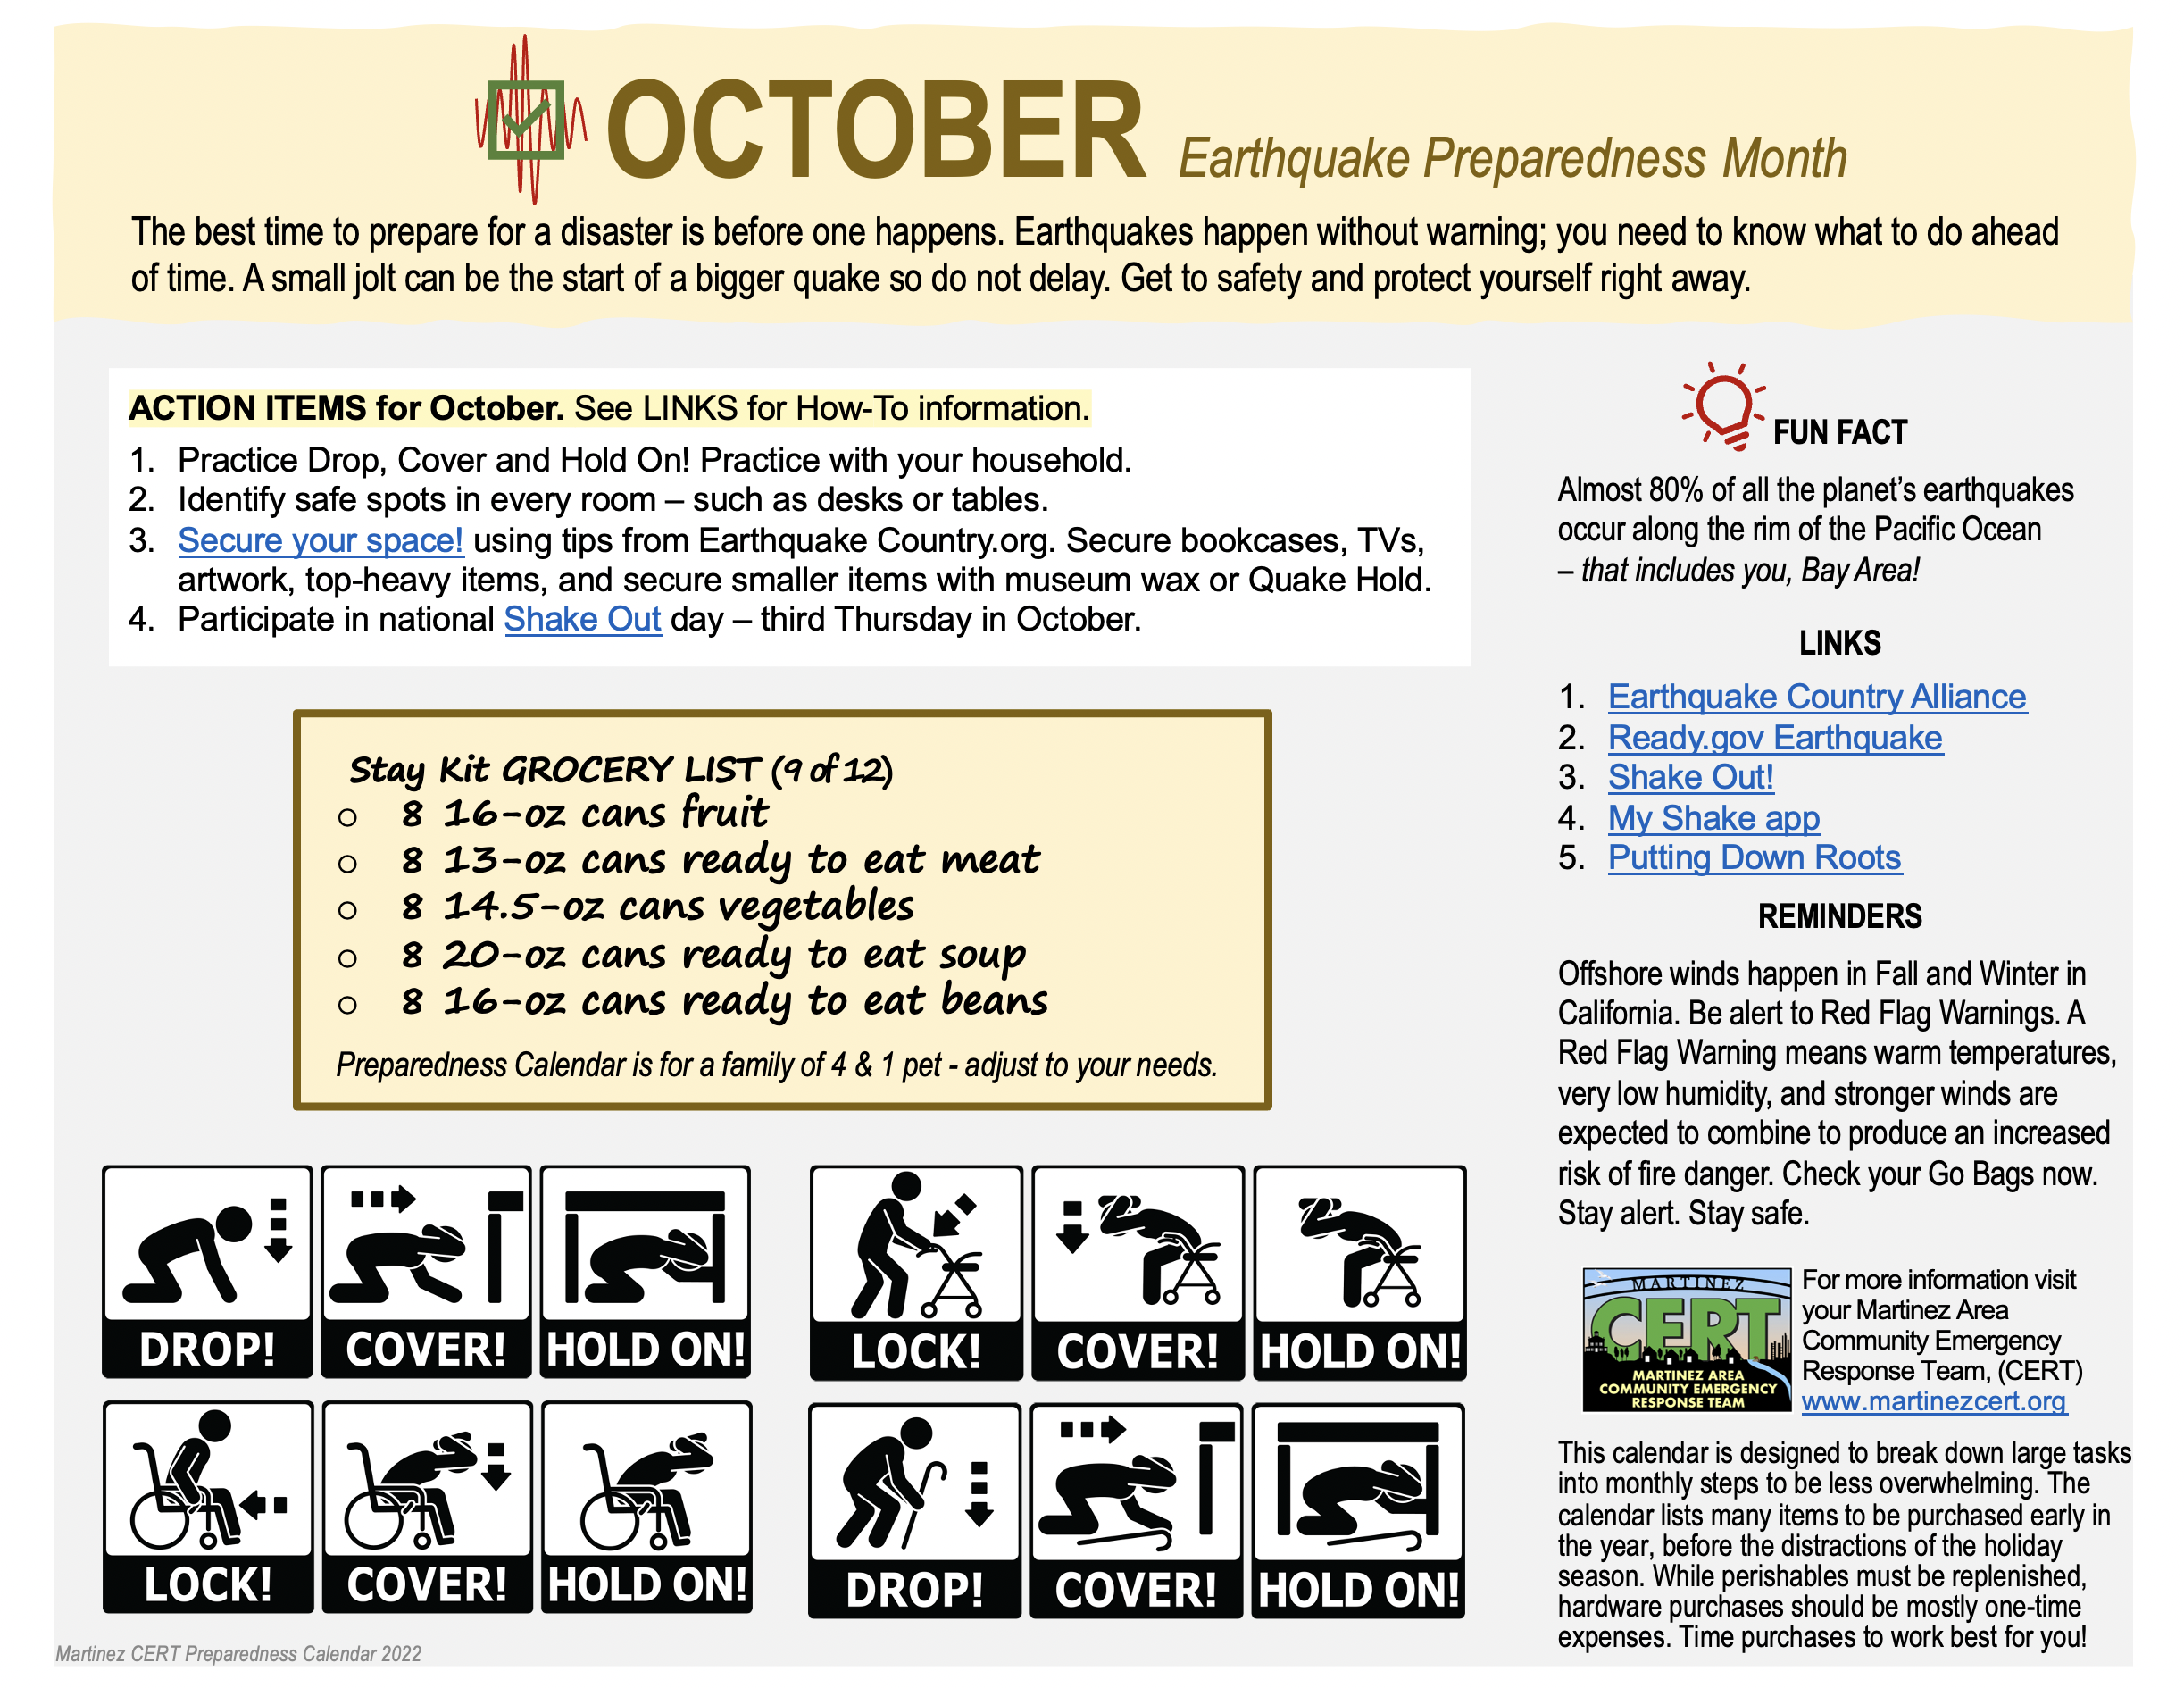 October is Earthquake Preparedness Month